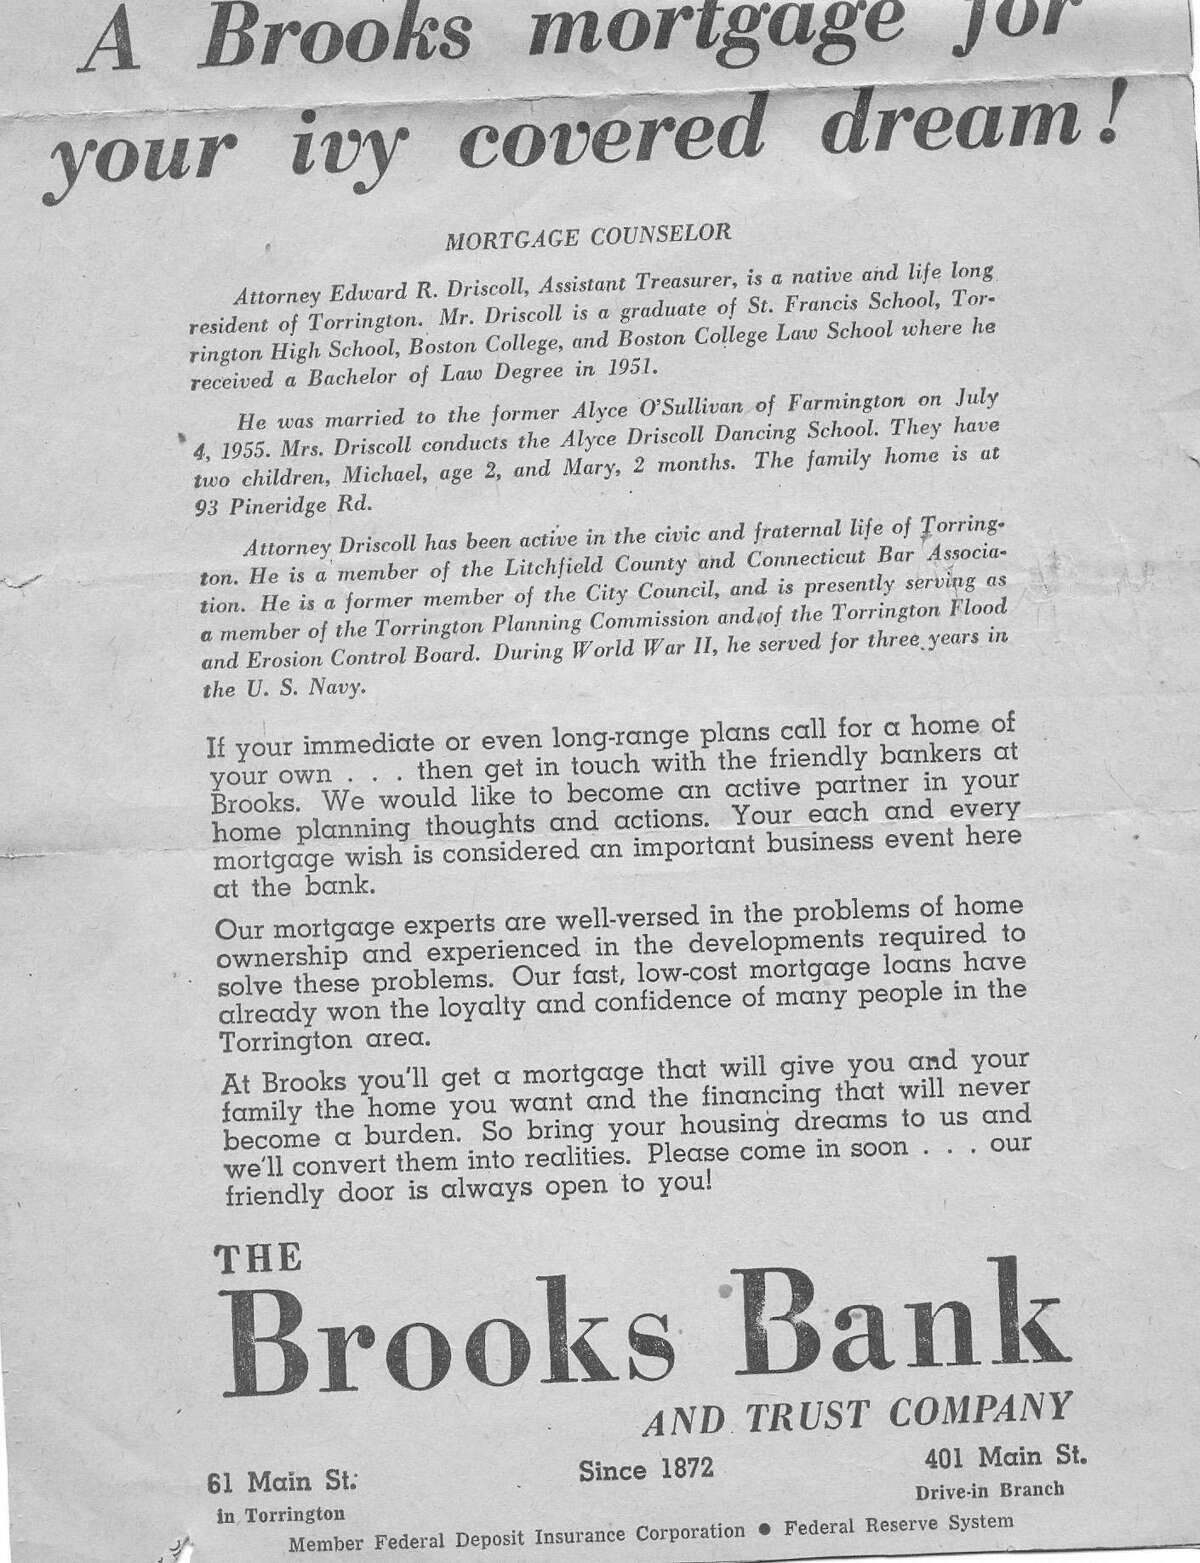 Here's the bottom half of the advertisement for Brooks Bank that featured my dad.